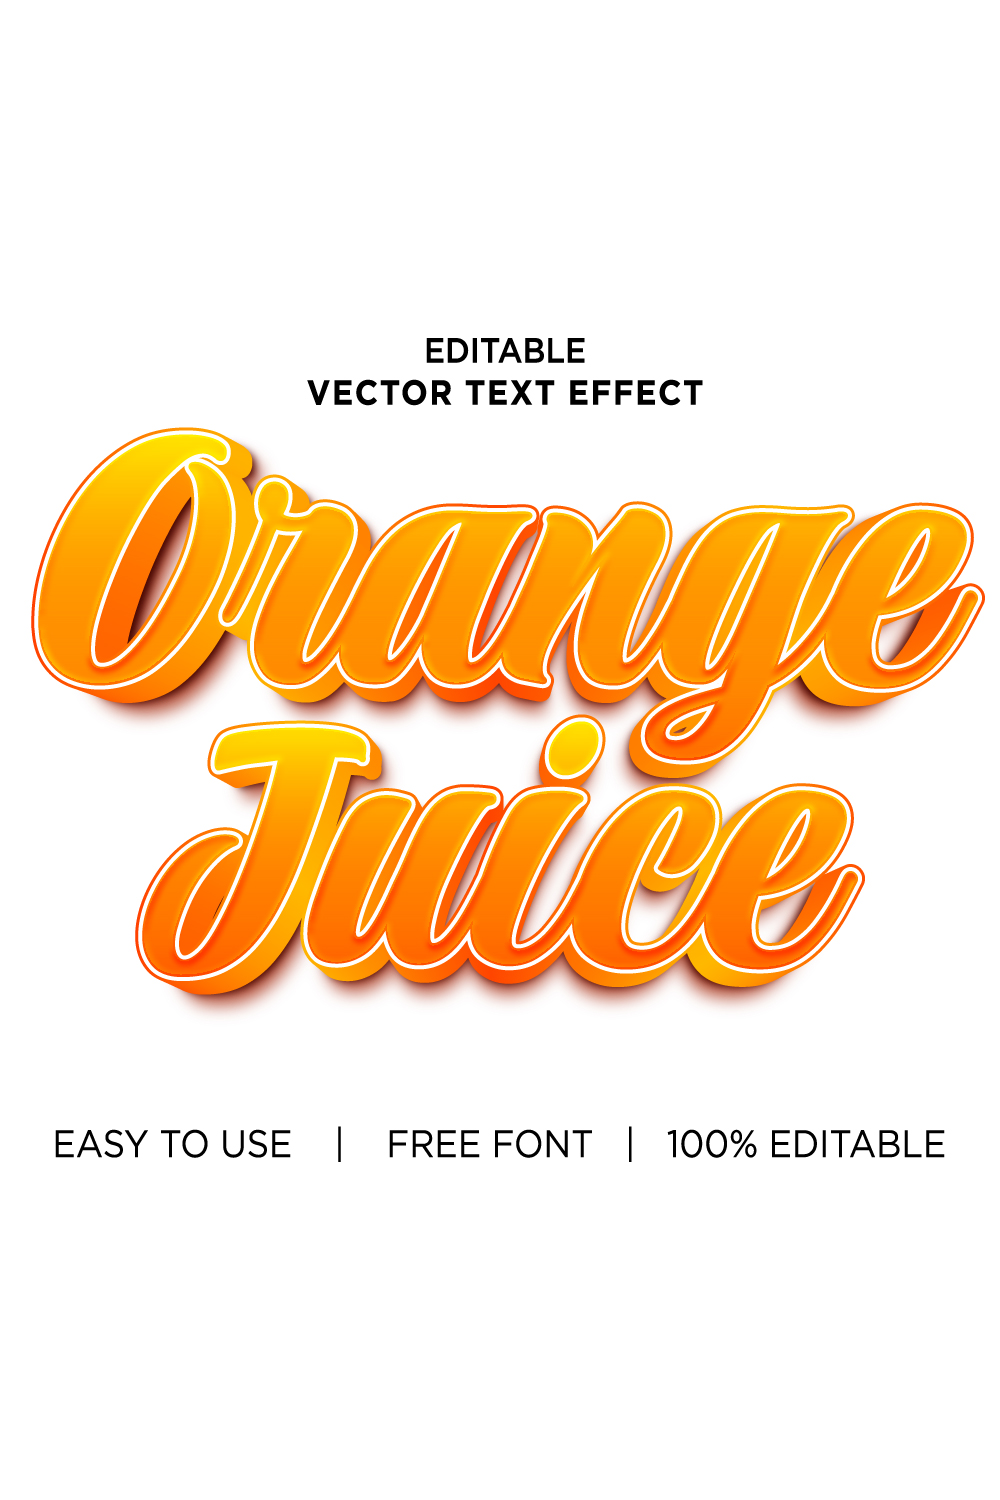 Orange juicy 3d text effects vector illustrations New Text style eps files Editable text effect vector pinterest preview image.